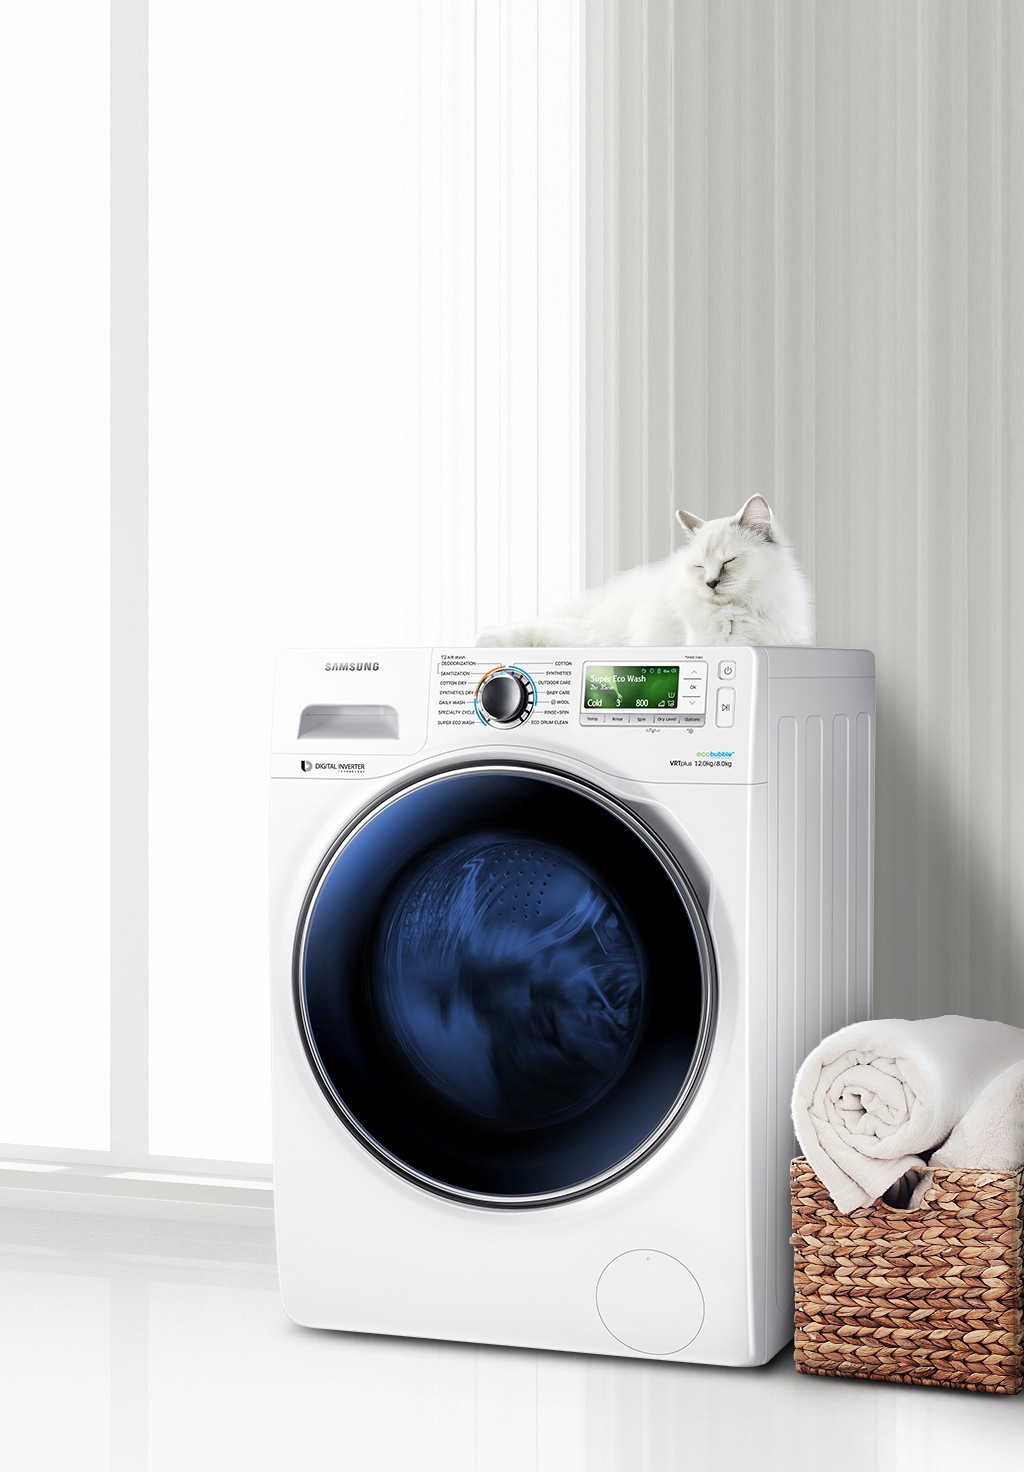 Buy Washer Dryer With Ecobubble 12kg Samsung Levant